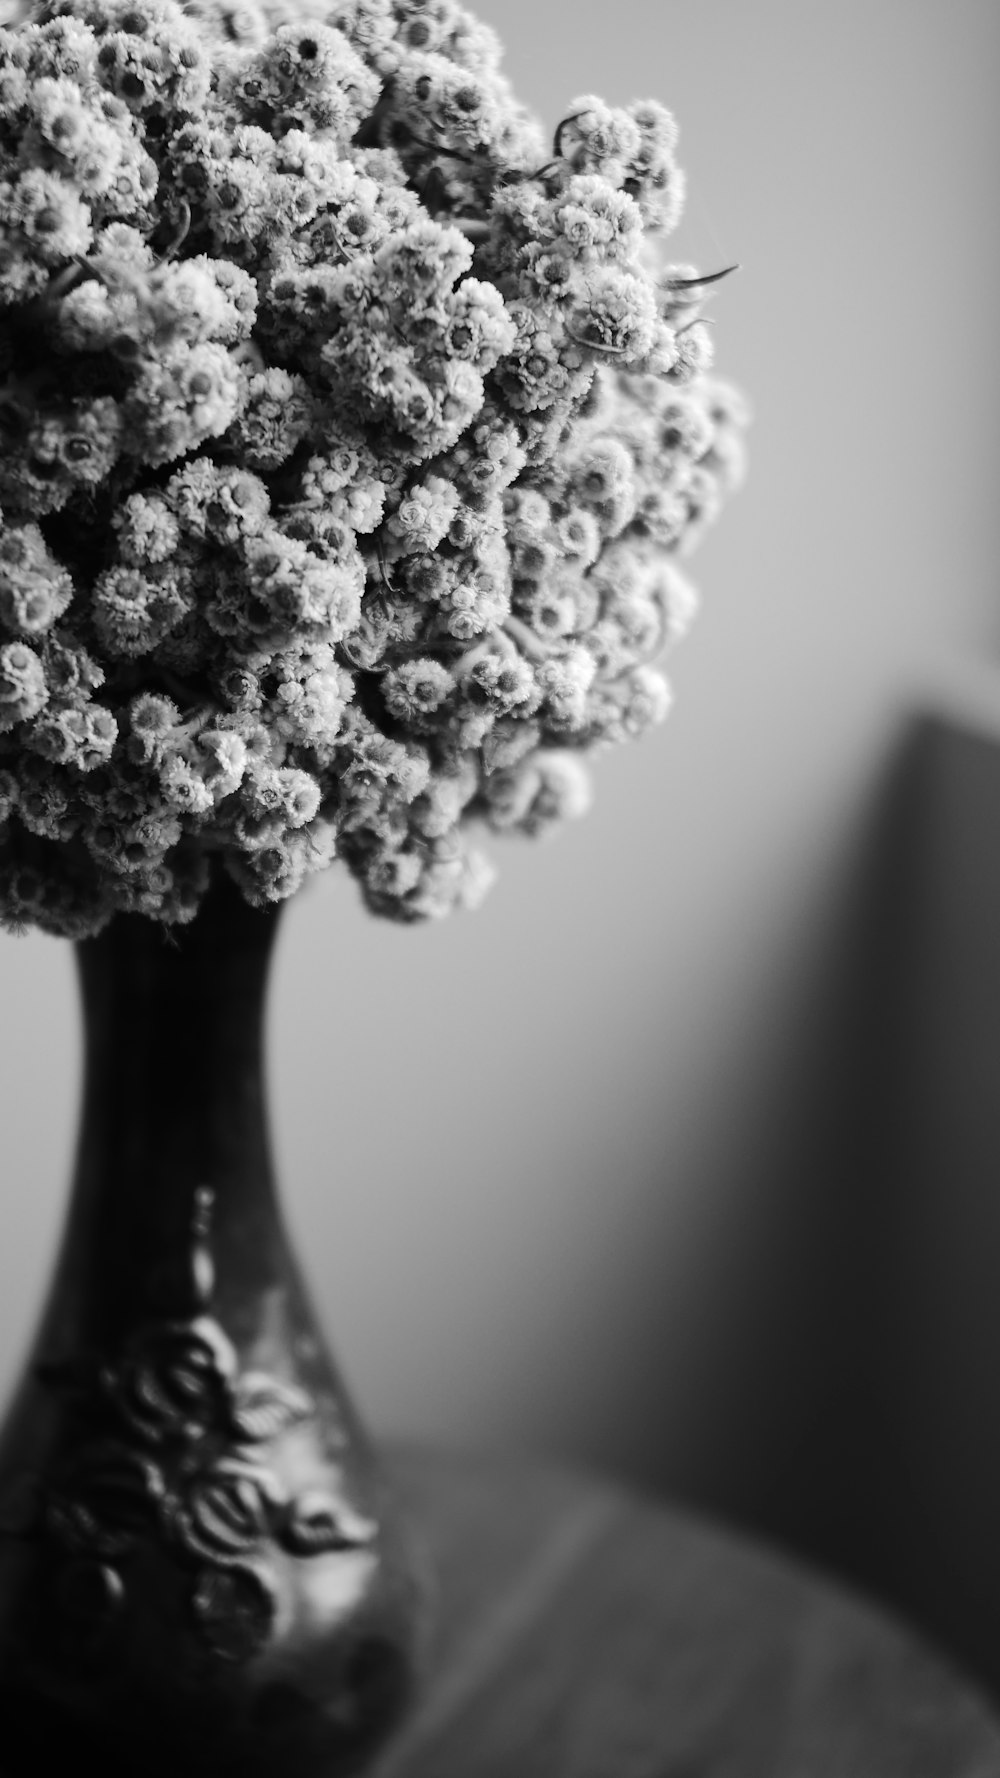 a black and white photo of a vase filled with flowers